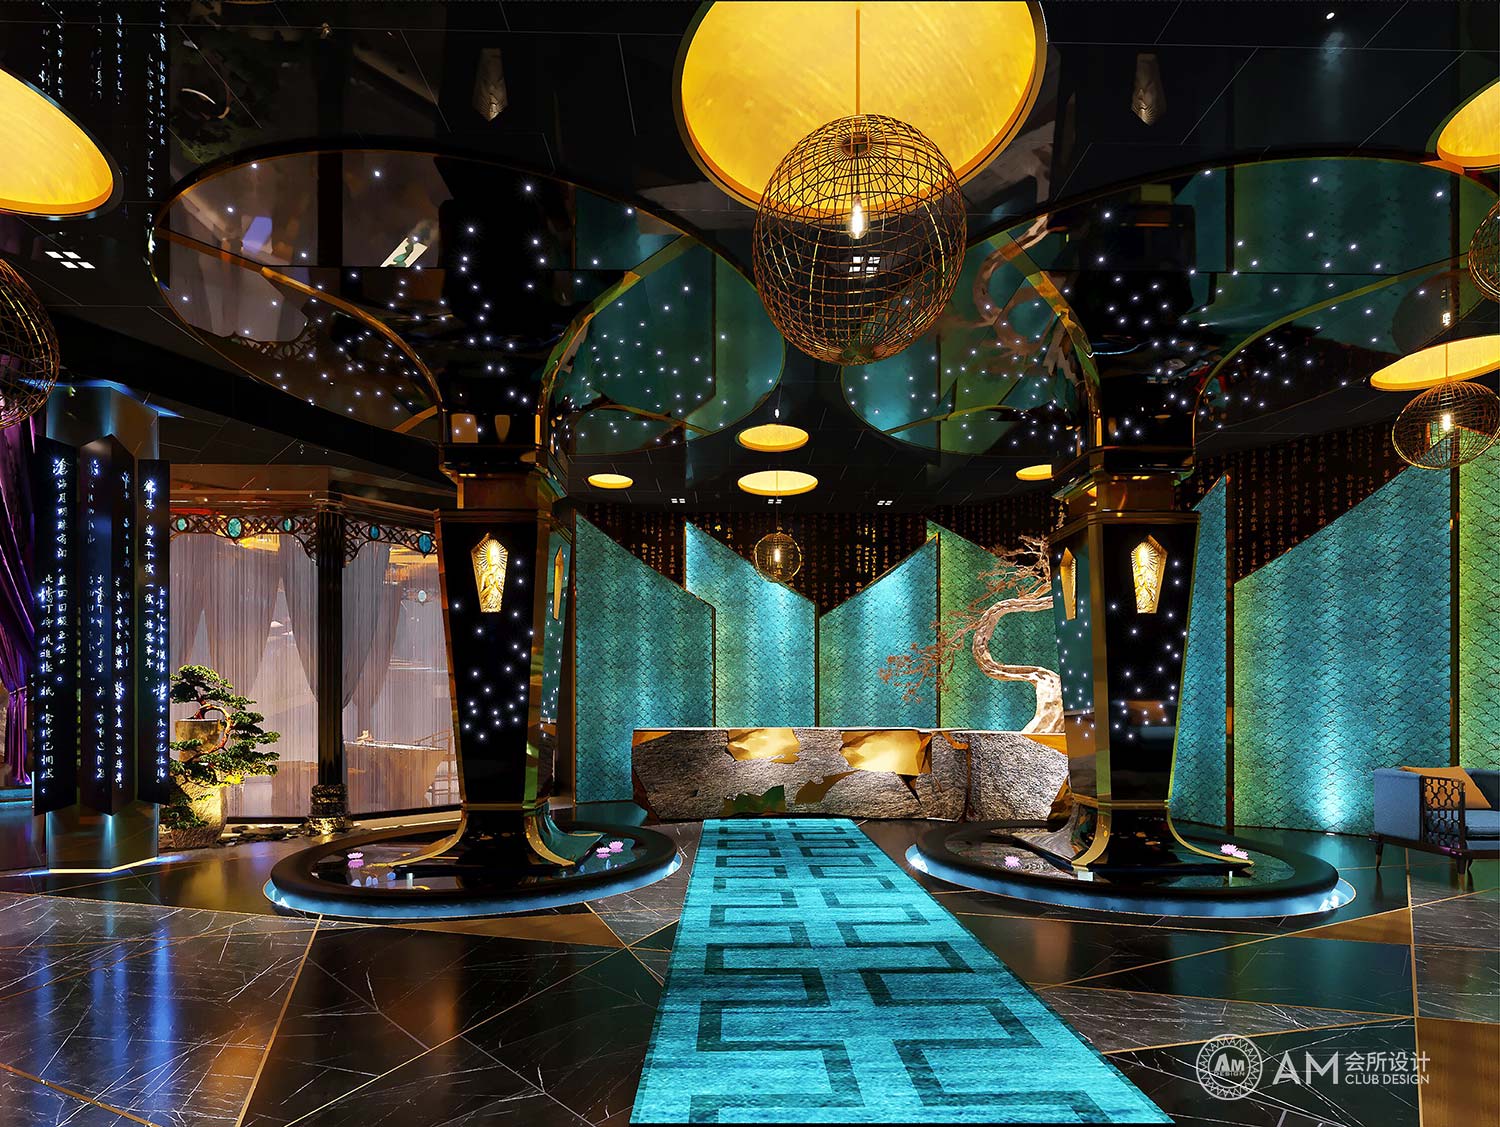 AM DESIGN | Lobby & front desk design of Top Spa Club in Baiziwan